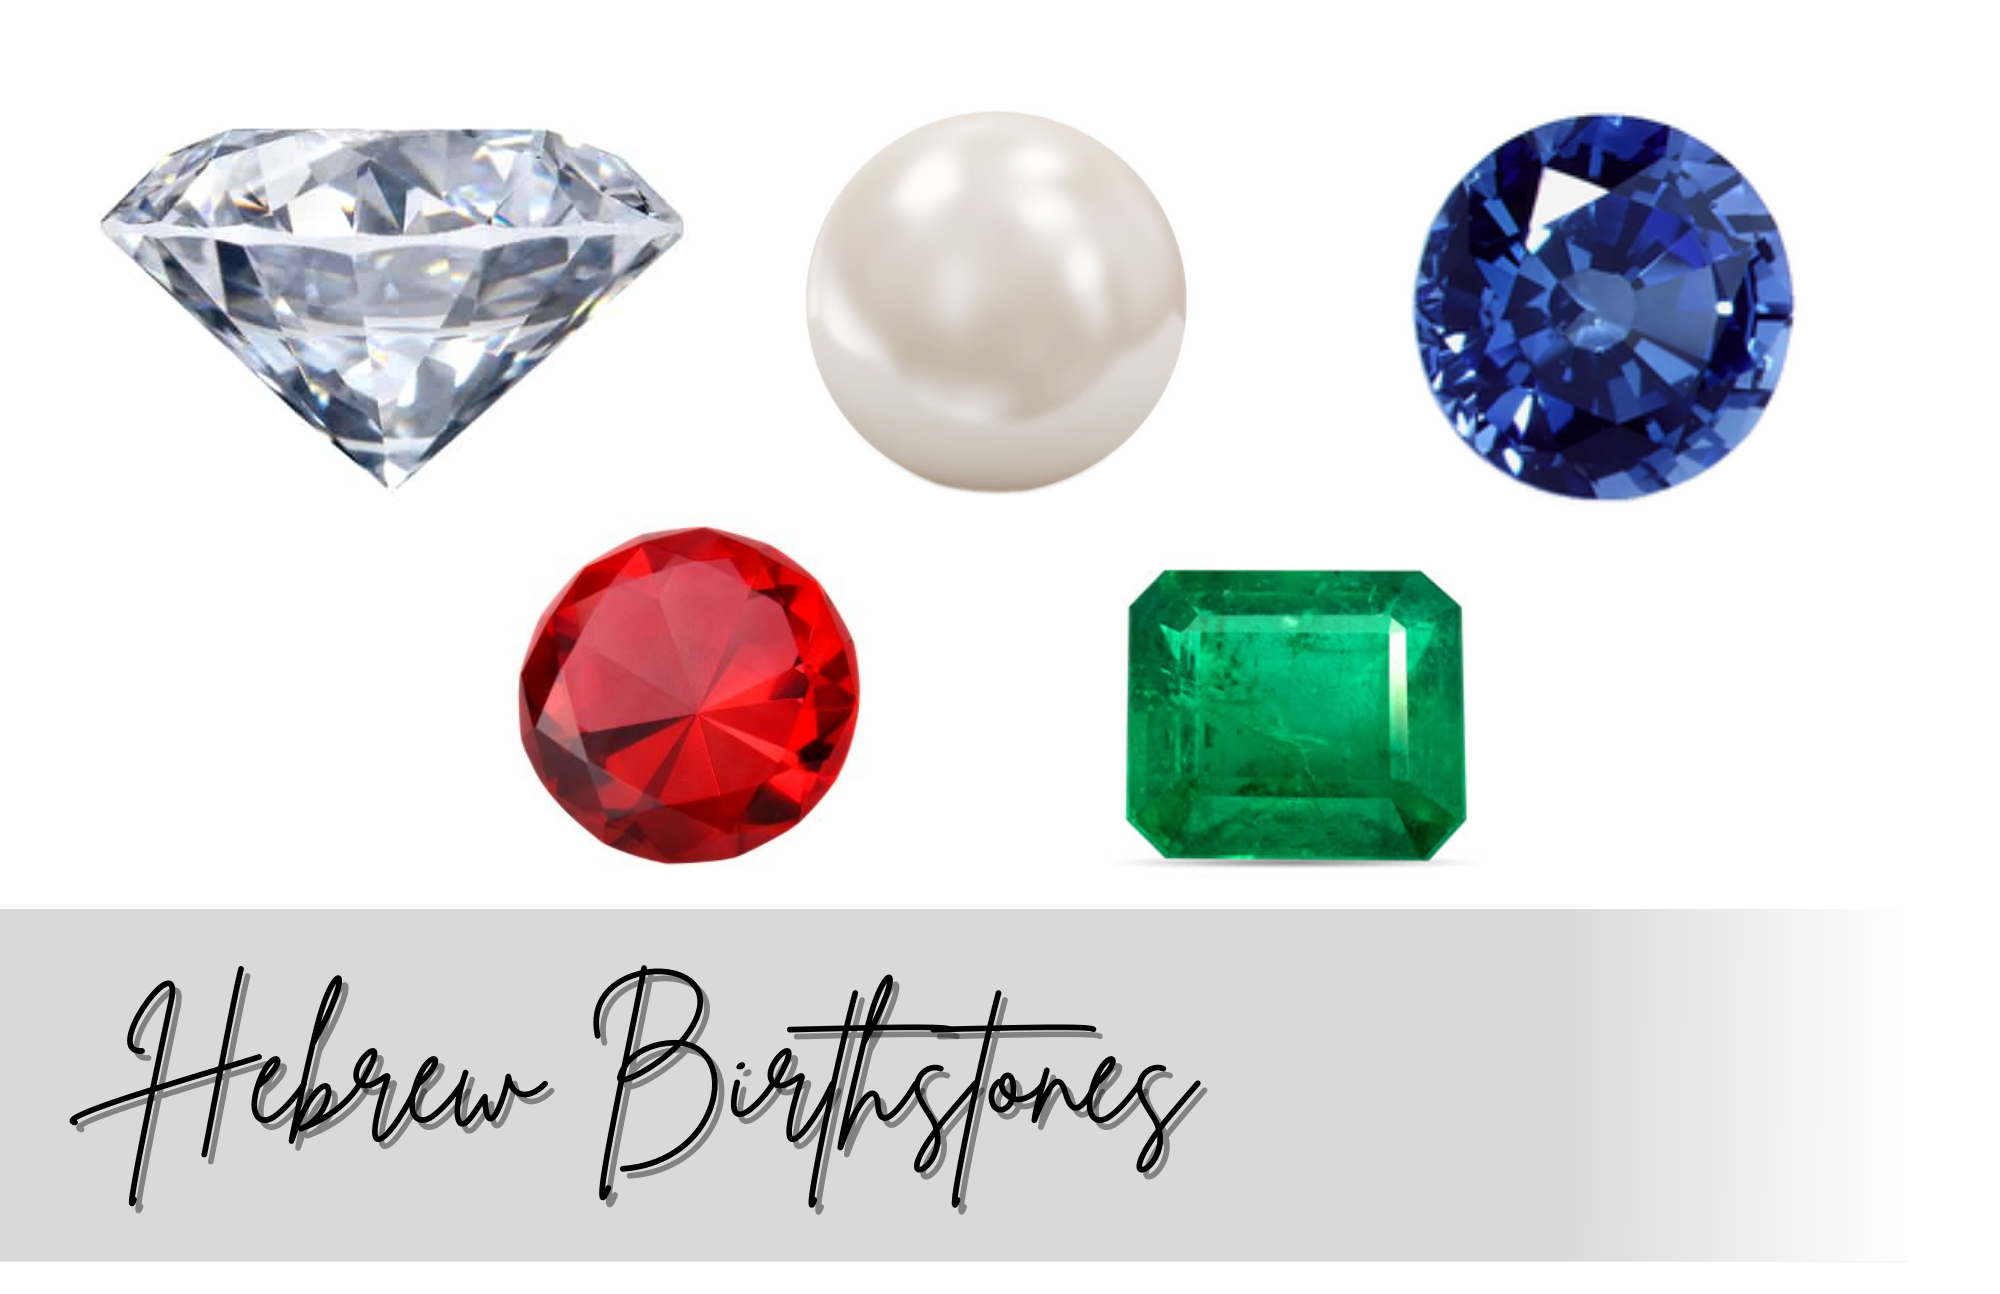 Hebrew Birthstones - A Look At The Five Most Popularly Recognized Powerful Stones